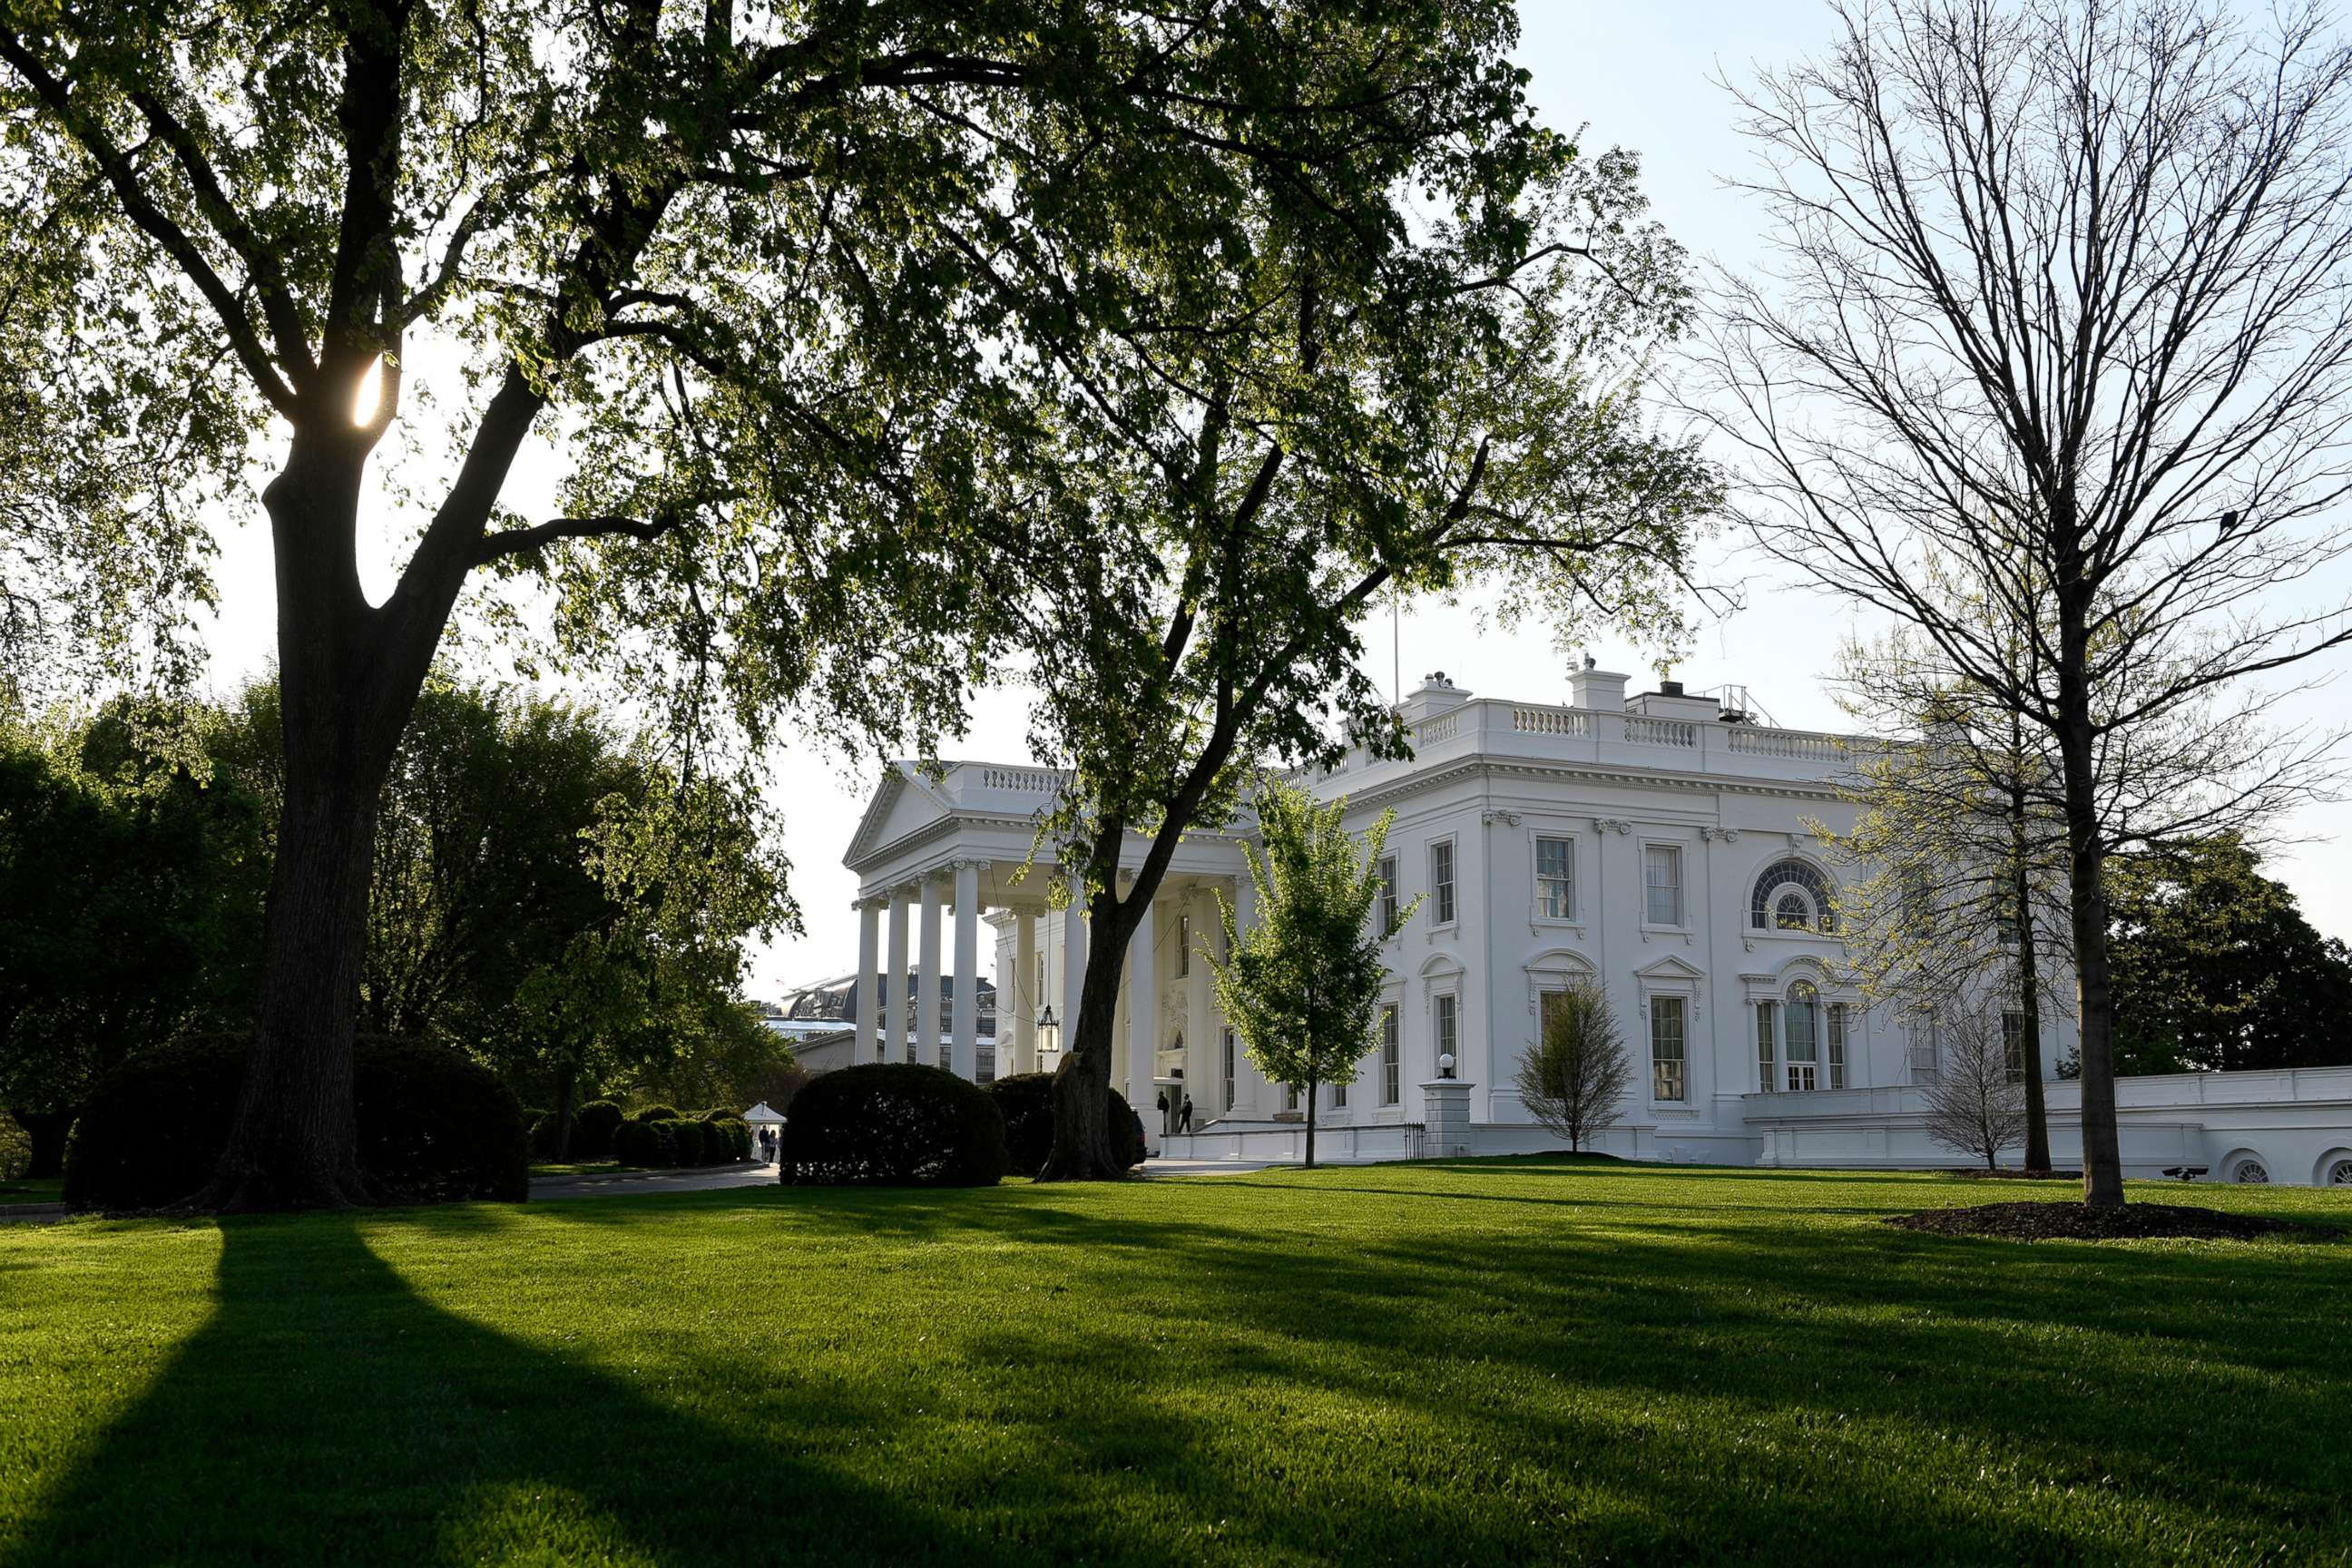 PHOTO: A view of the White House in Washington,D.C., April 17, 2019.